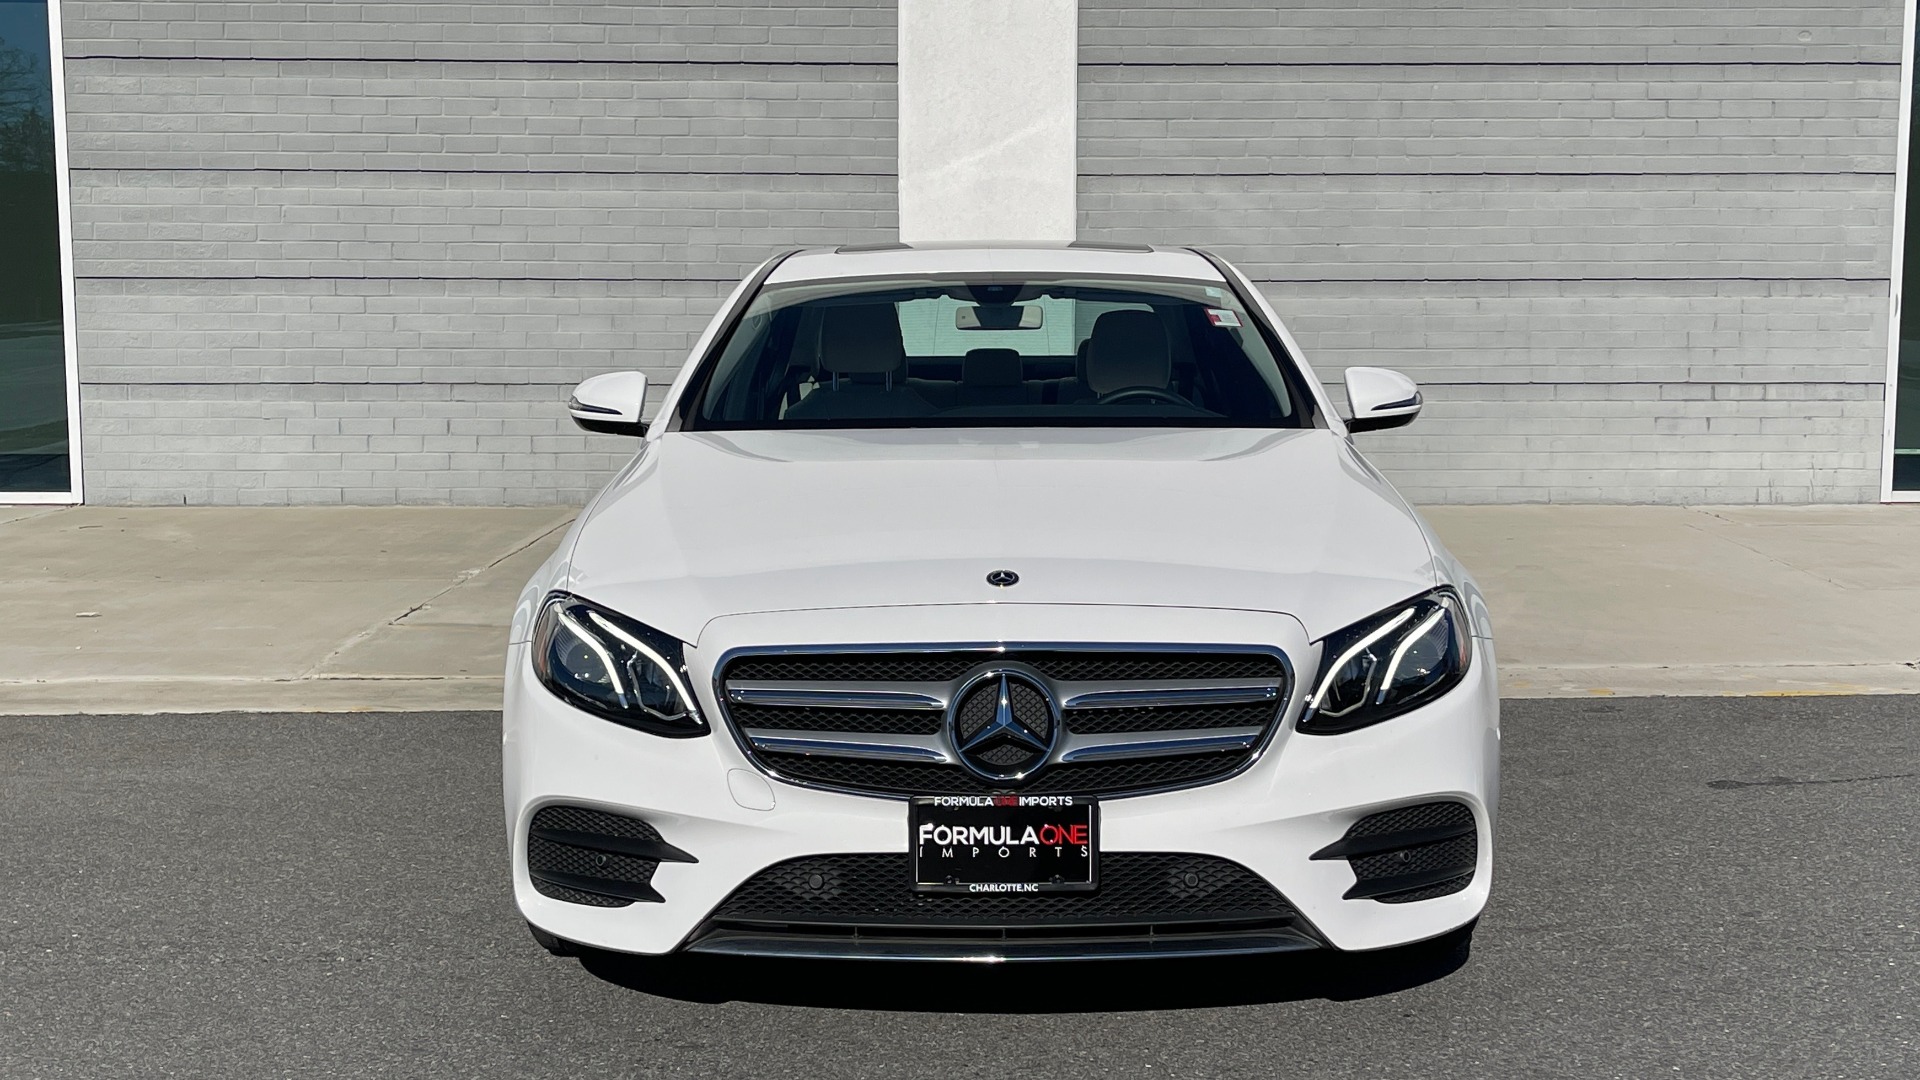 Used 2018 Mercedes-Benz E-CLASS E 300 2.0L SEDAN / RWD / 9-SPD AUTO / BLIND SPOT ASSIST / REARVIEW for sale $41,999 at Formula Imports in Charlotte NC 28227 8